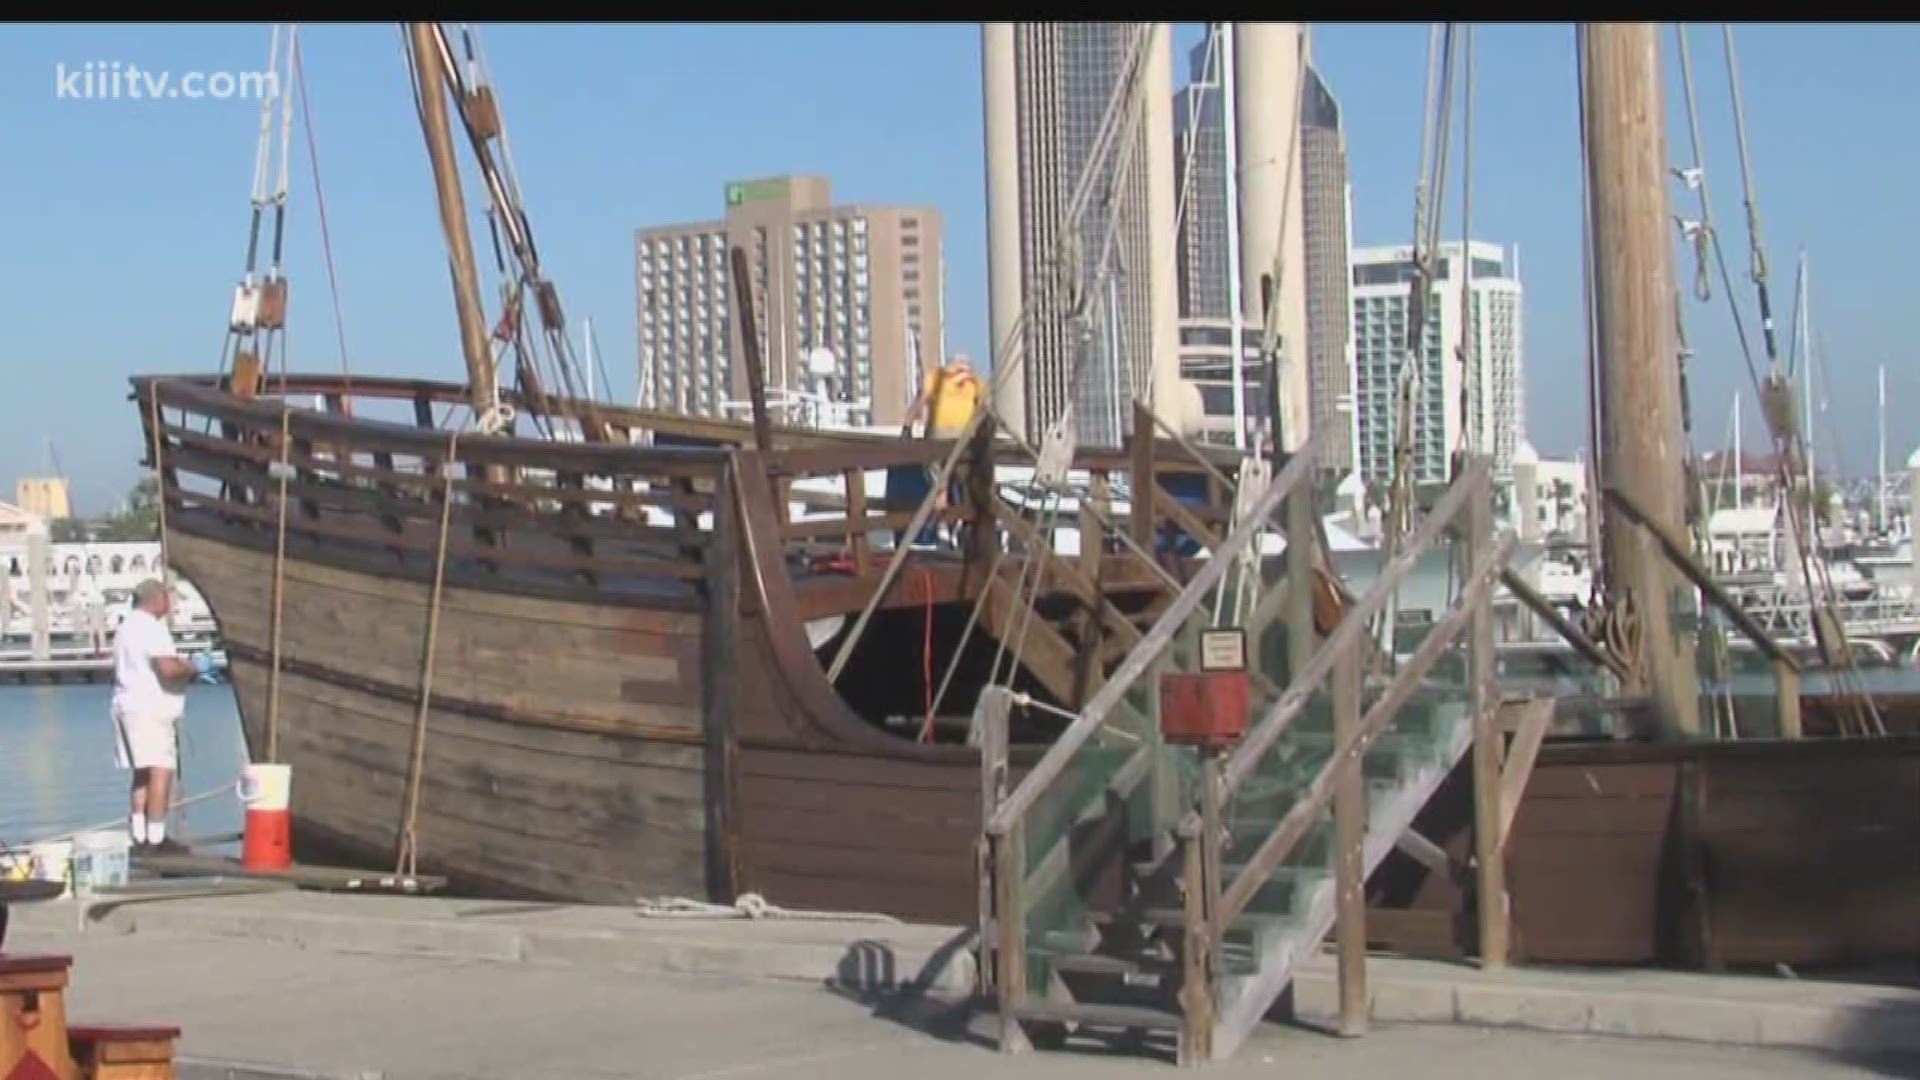 An extension to help restore one of the Christopher Columbus ship replicas, the La Nina, was filed by the City of Corpus Christi and the Columbus Sailing Association Tuesday.